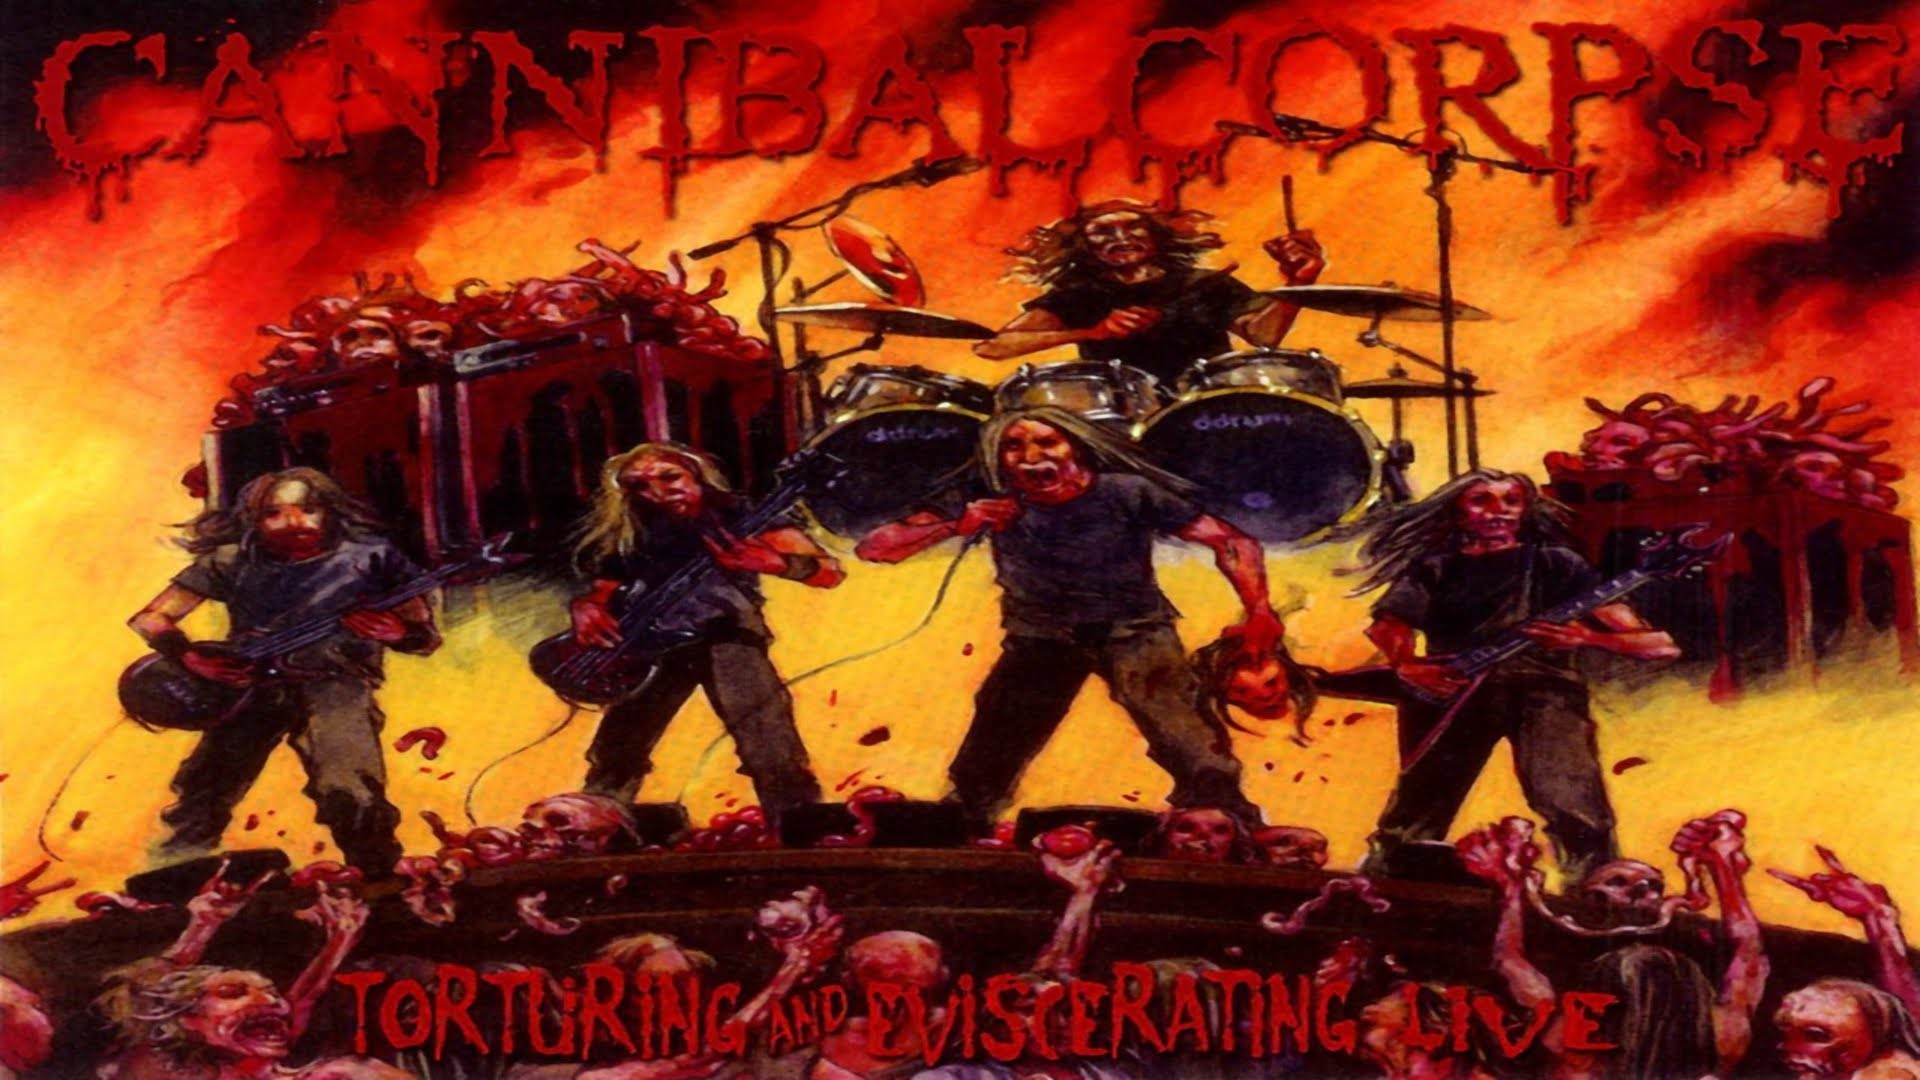 1920x1080 CANNIBAL CORPSE - Torturing and Eviscerating Live [Full Album] - YouTube